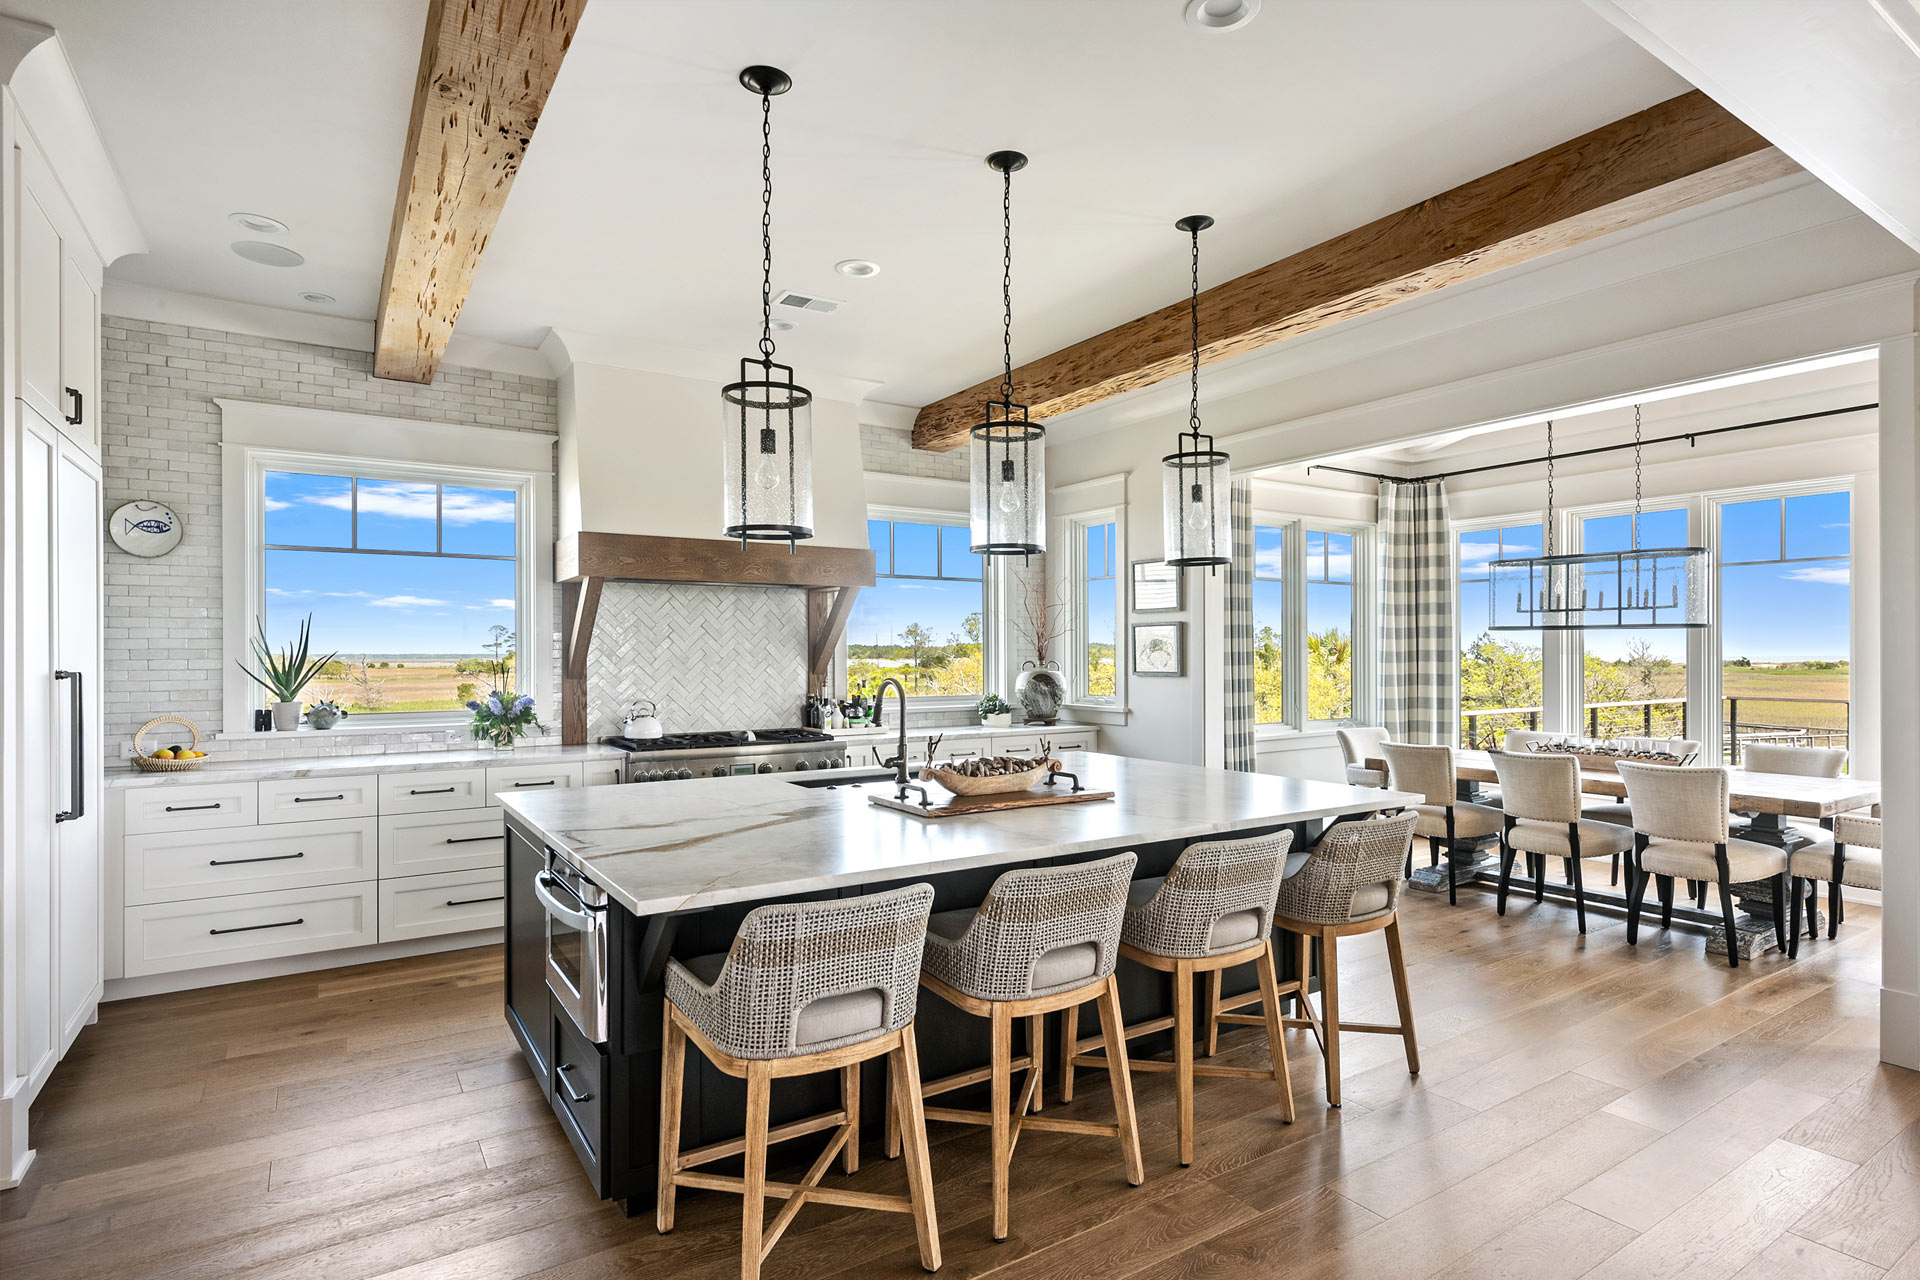 Show Gathering Kitchen in new construction home with 180 degree marsh and ocean views